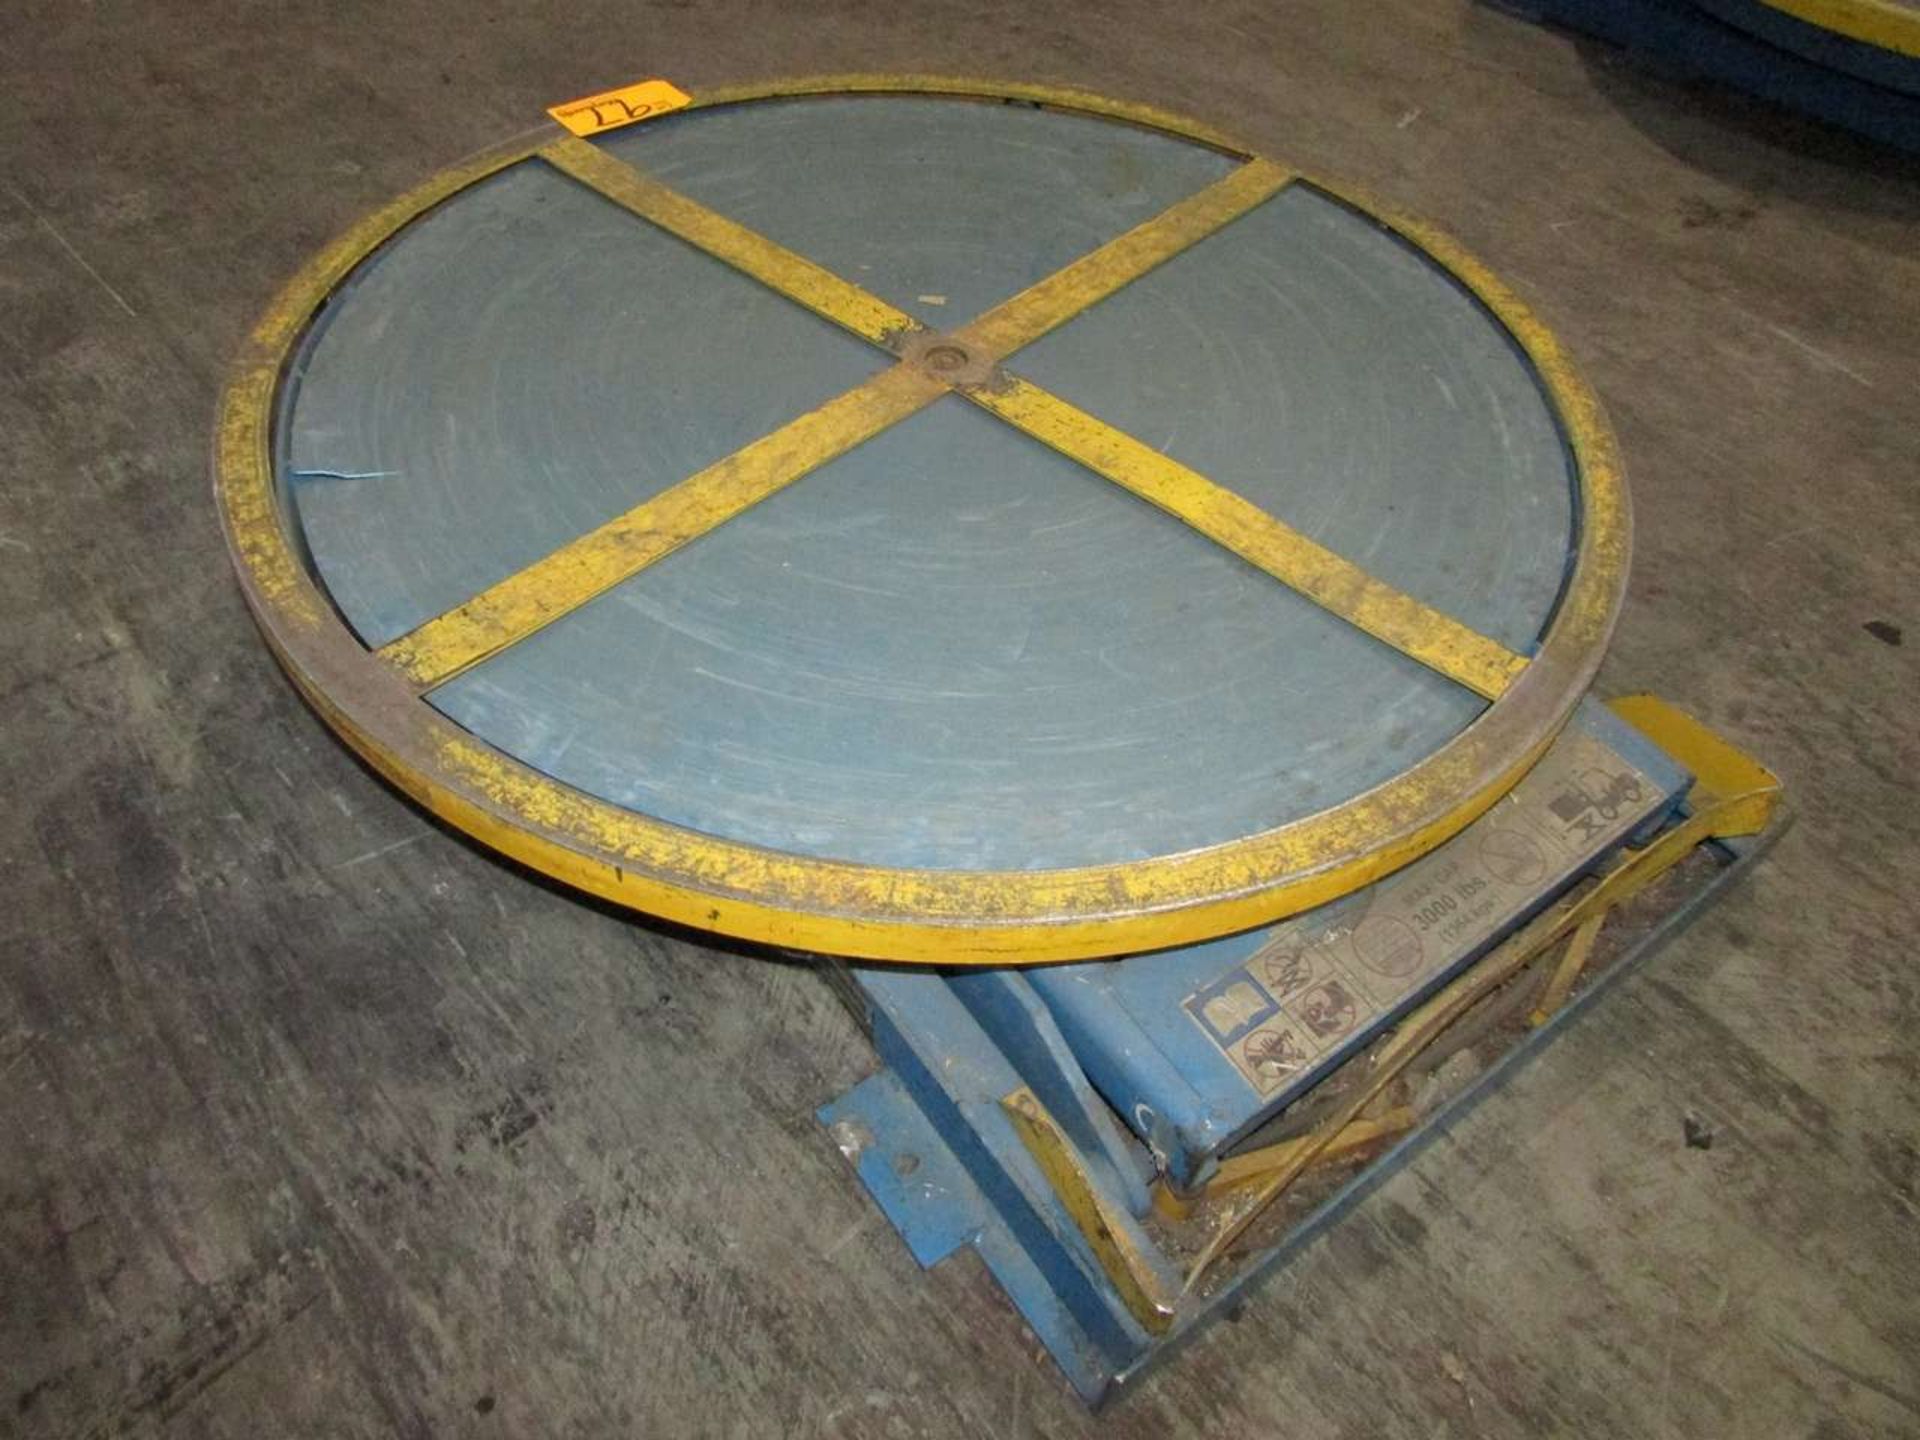 EZ Loader EZ-30 Pneumatic Rotary Lift Table - Image 2 of 2